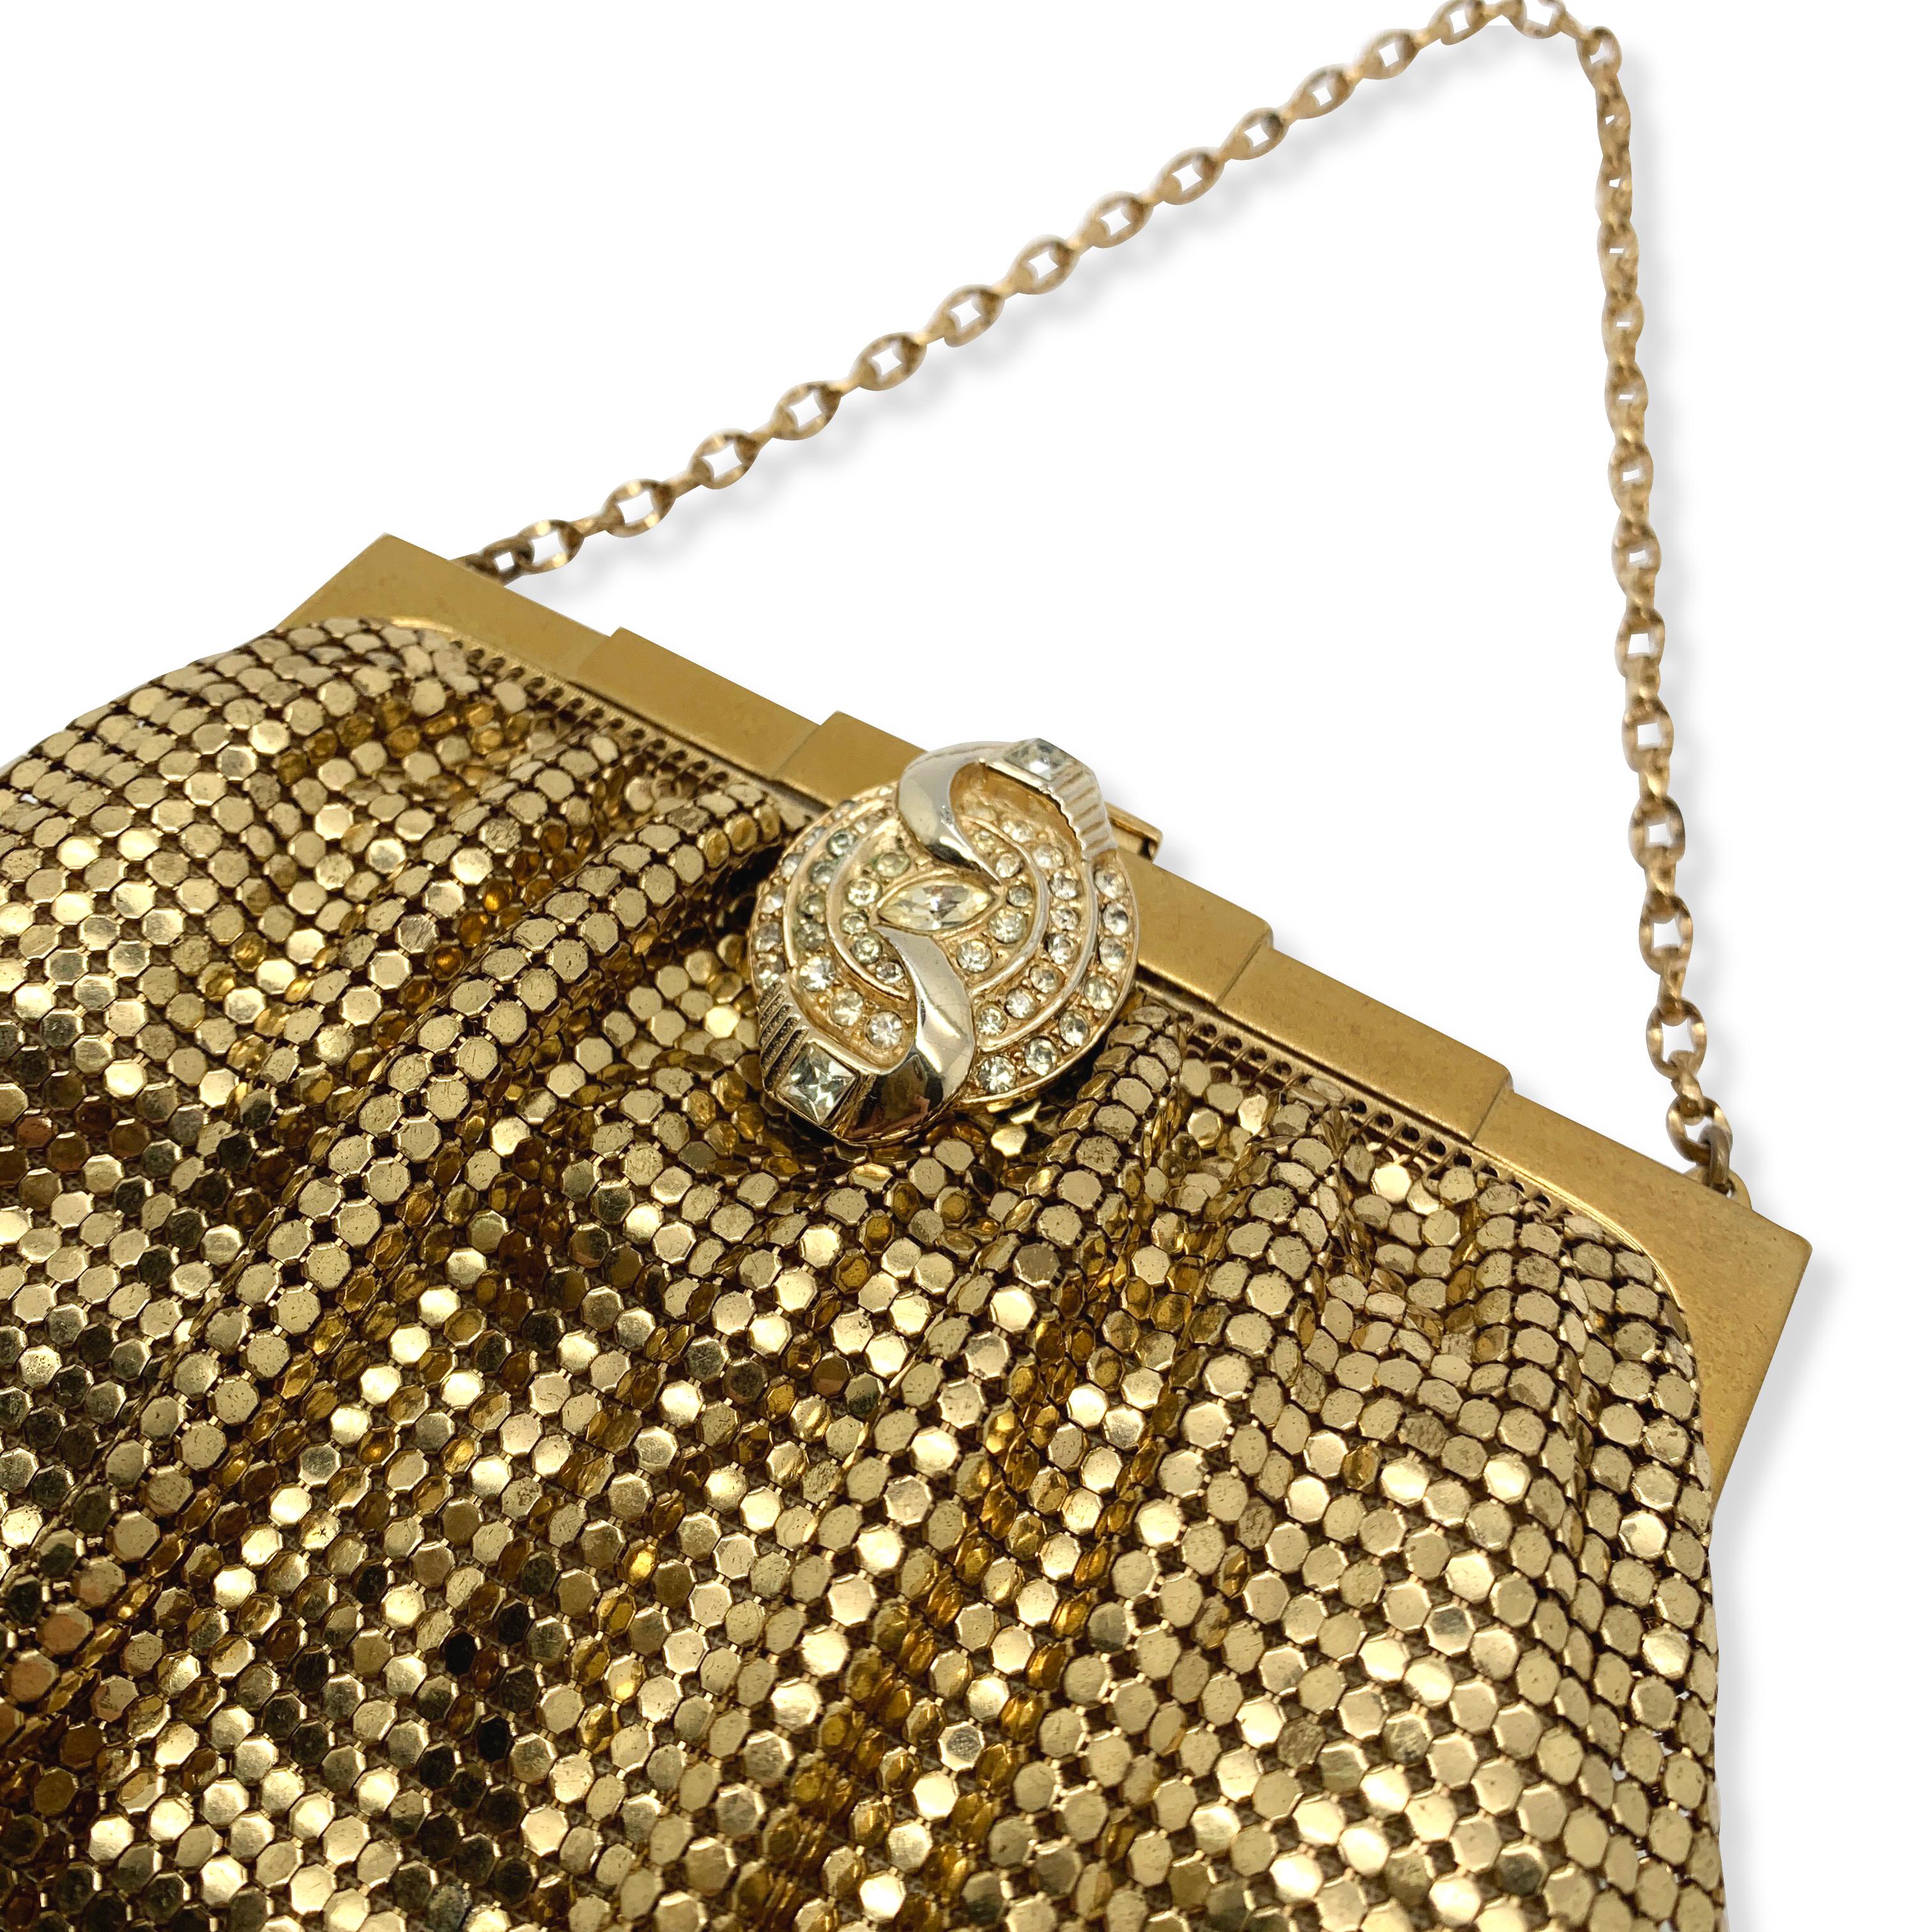 1950\u2019s Vintage Whiting & Davis Silver Chain Mail Metal Mesh Purse with Chain Strap